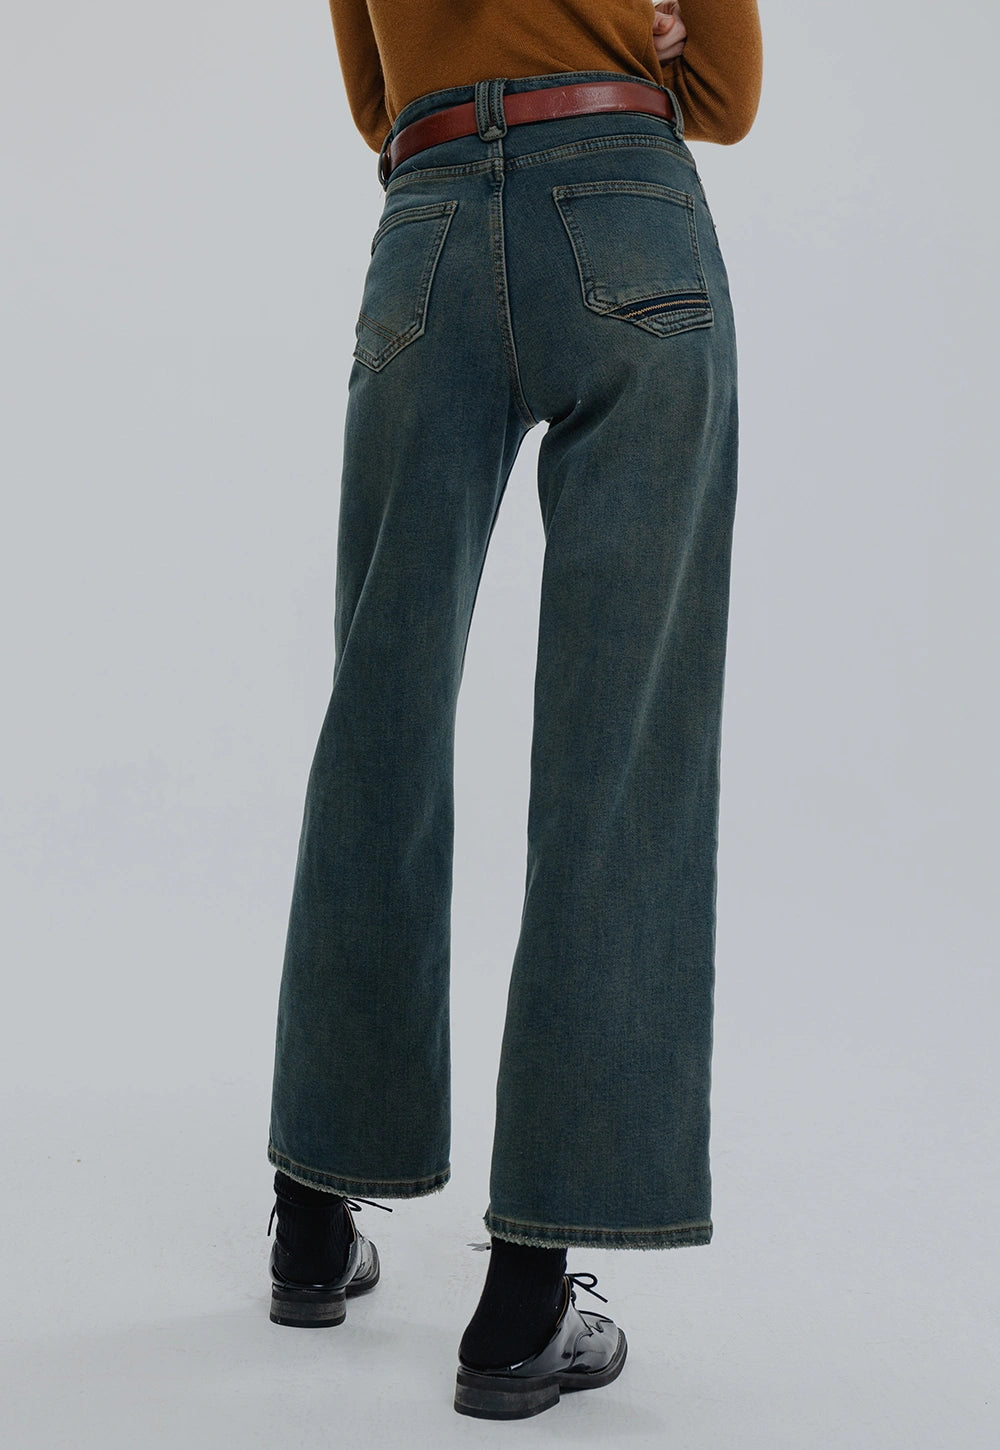 Women's Wide-Leg Denim Jeans with Contrast Stitching and Belt Loops